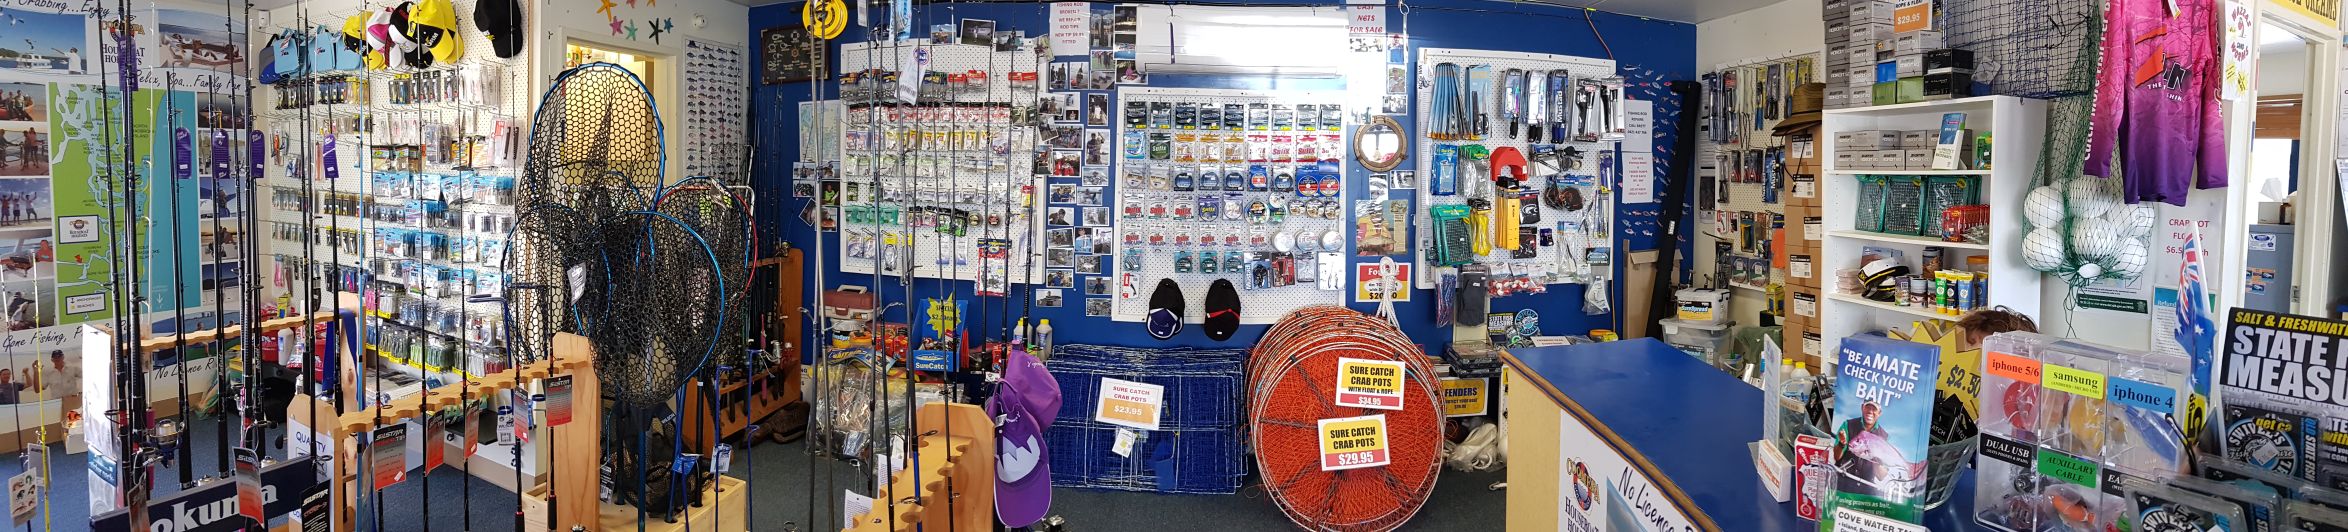 COOMERA BAIT & TACKLE SHOP - ALL YOUR FISHING & CRABBING NEEDS, PLUS ICE &  LPG REFILLS.